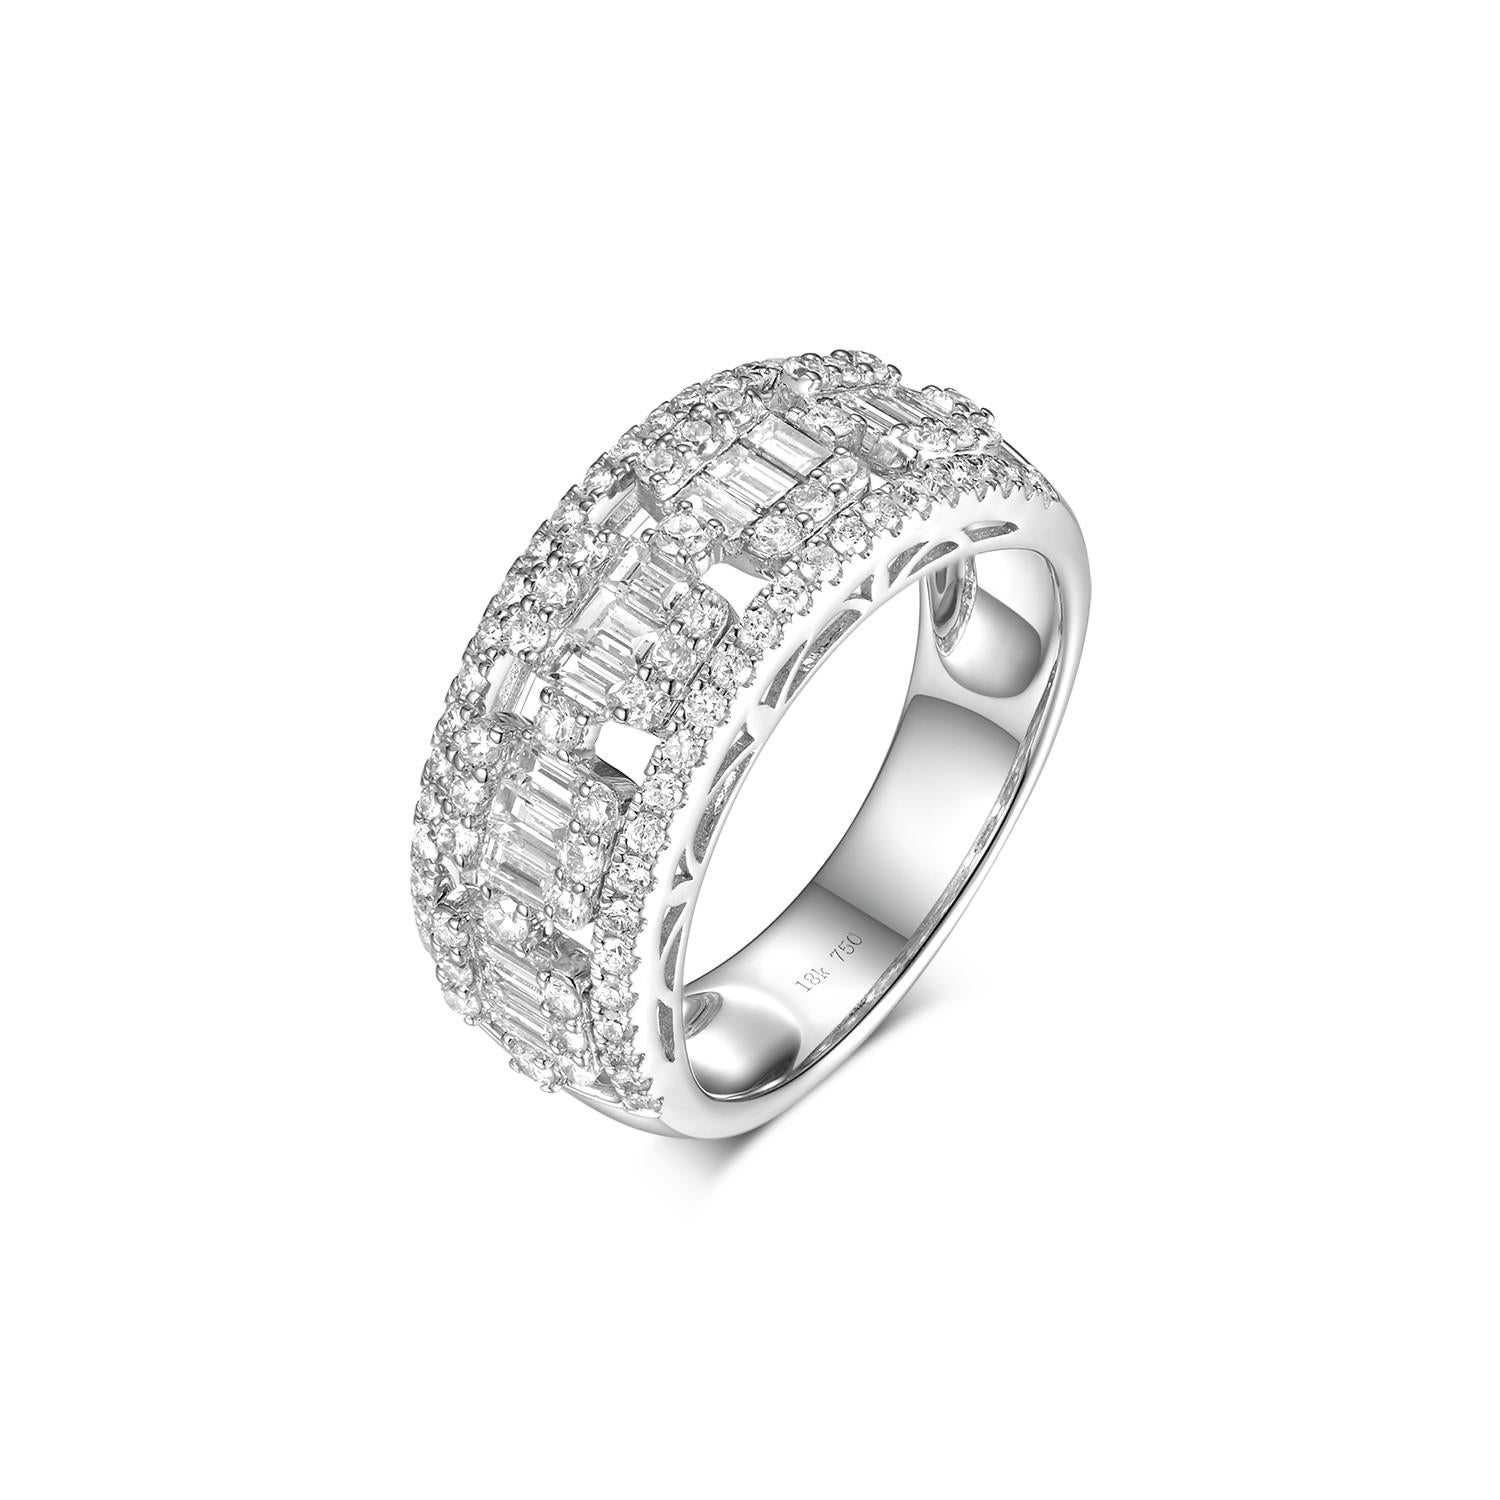 This band ring features taper diamond 0.58 carat and round diamond 0.69 carat.  A simple yet elegant piece.  Truly a special gift for that special someone.

US 6.5
Resizing is available
Taper Diamond 0.58 carat
Round Diamond 0.69 carat